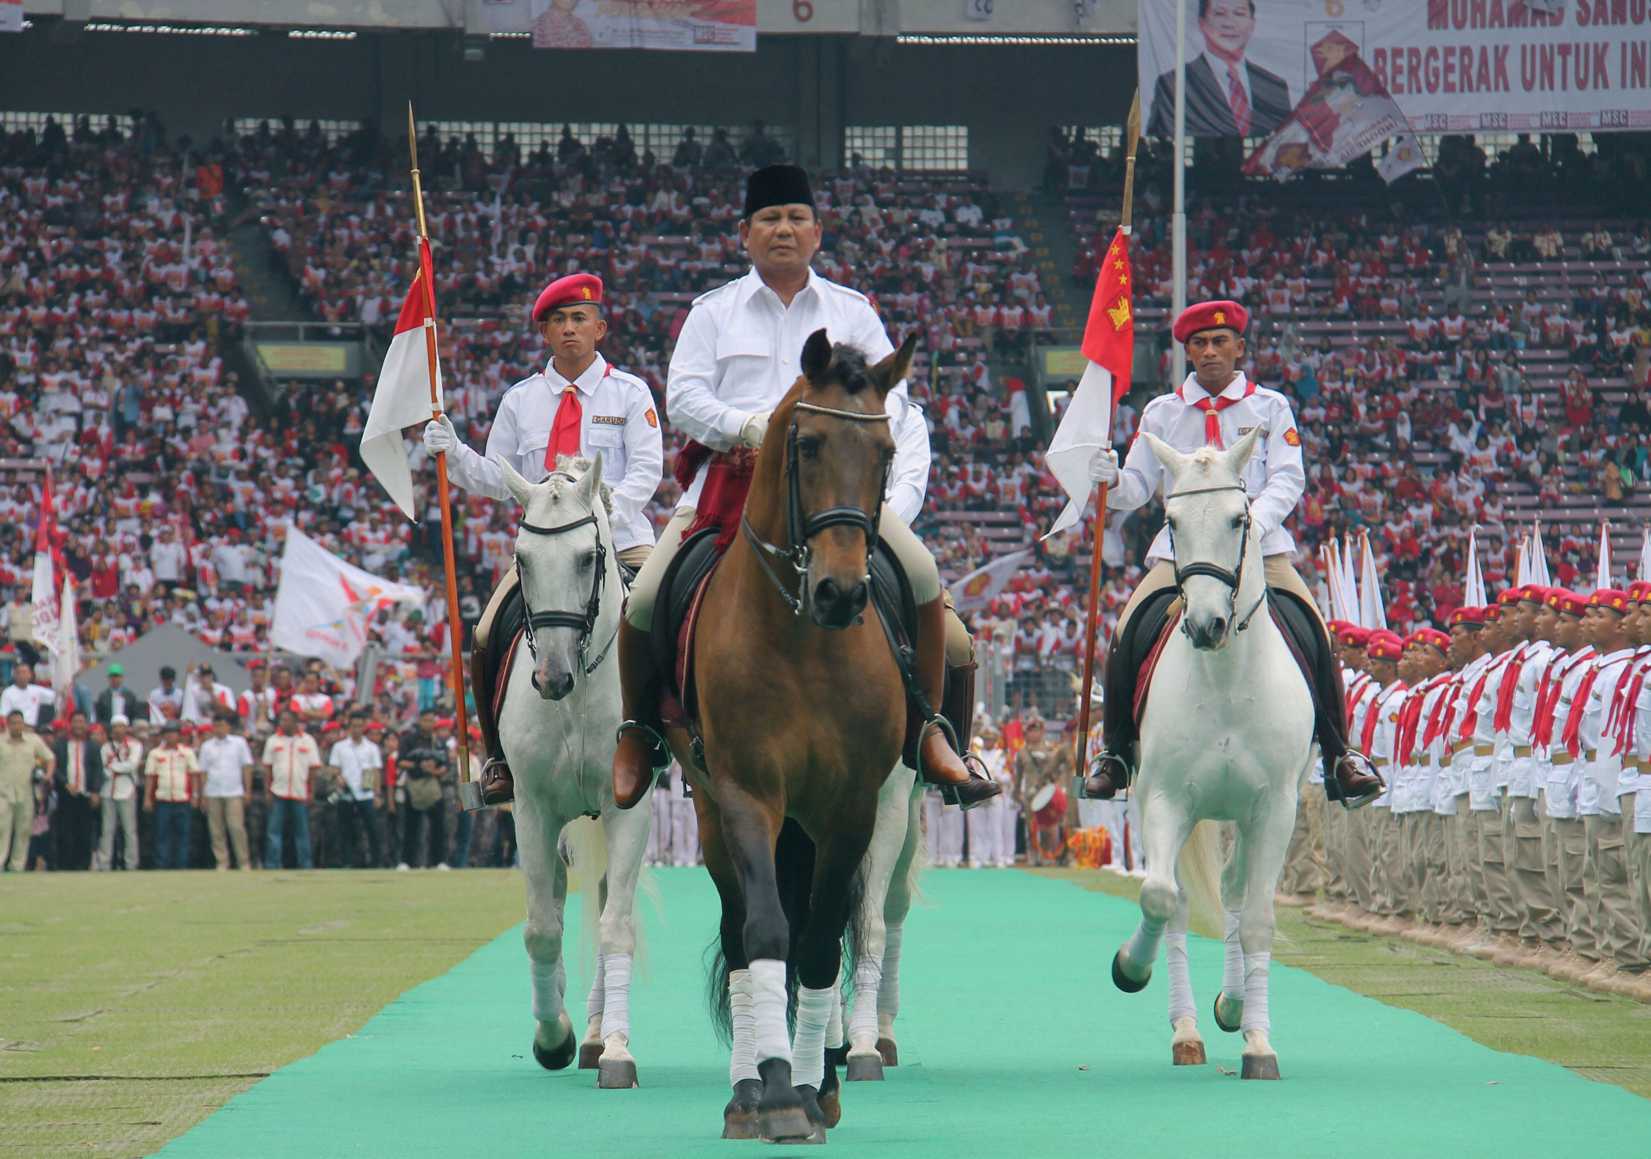 Retired general Prabowo Subianto rides a horse at a stadium in Jakarta during a campaign rally of the Gerindra party on March 23, 2014 (Kyodo / AP)